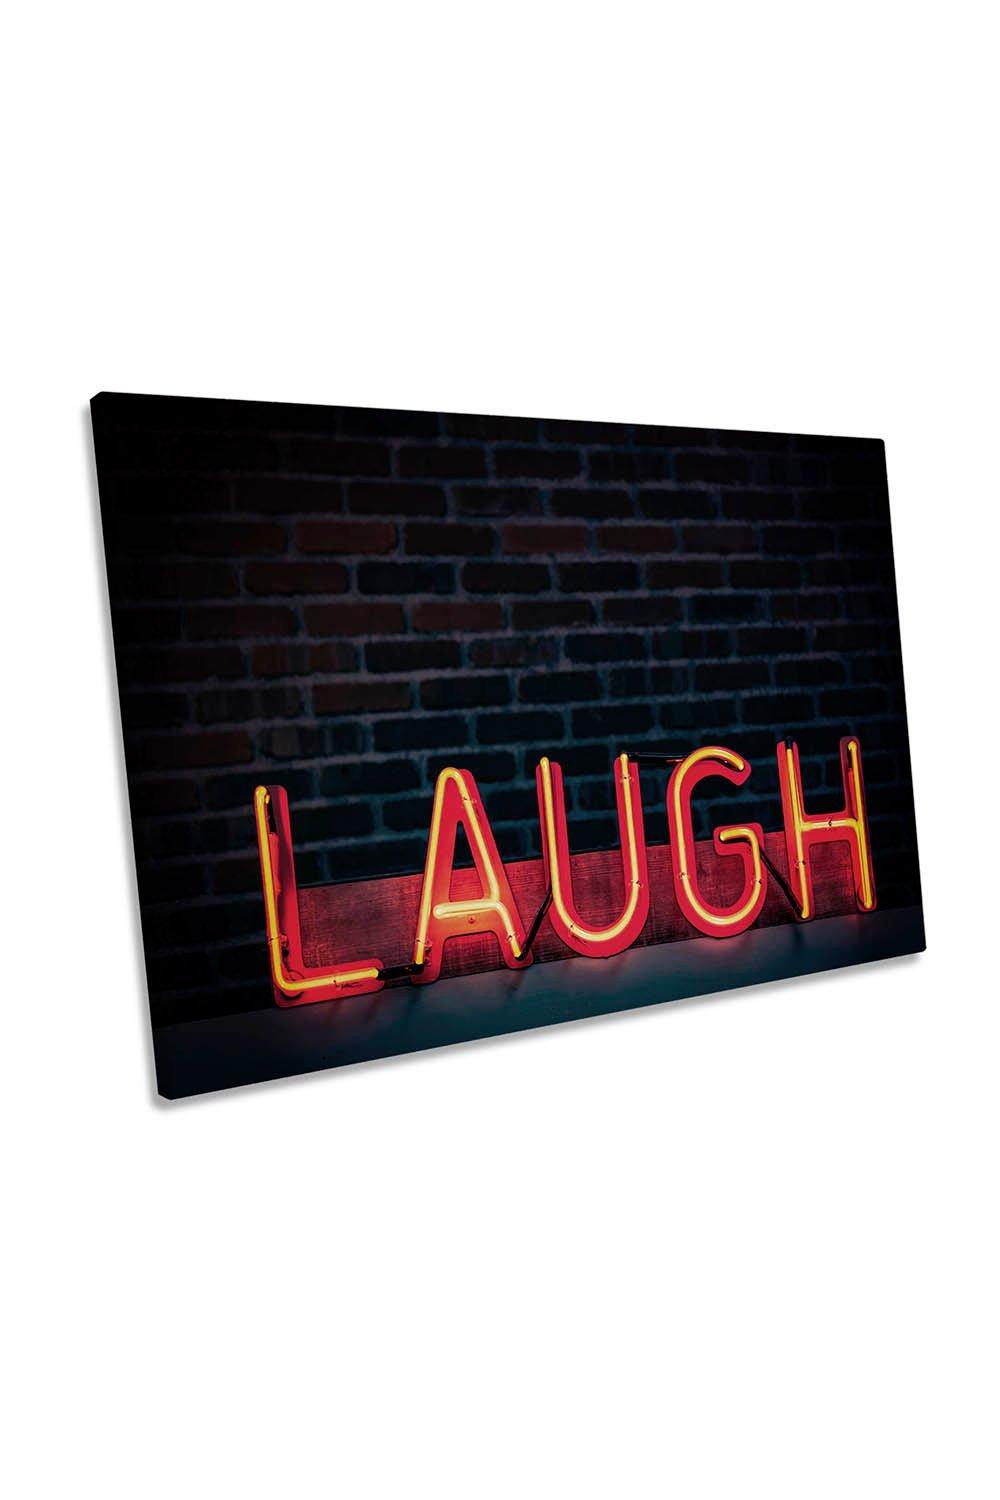 Laugh in Neon Sign Canvas Wall Art Picture Print